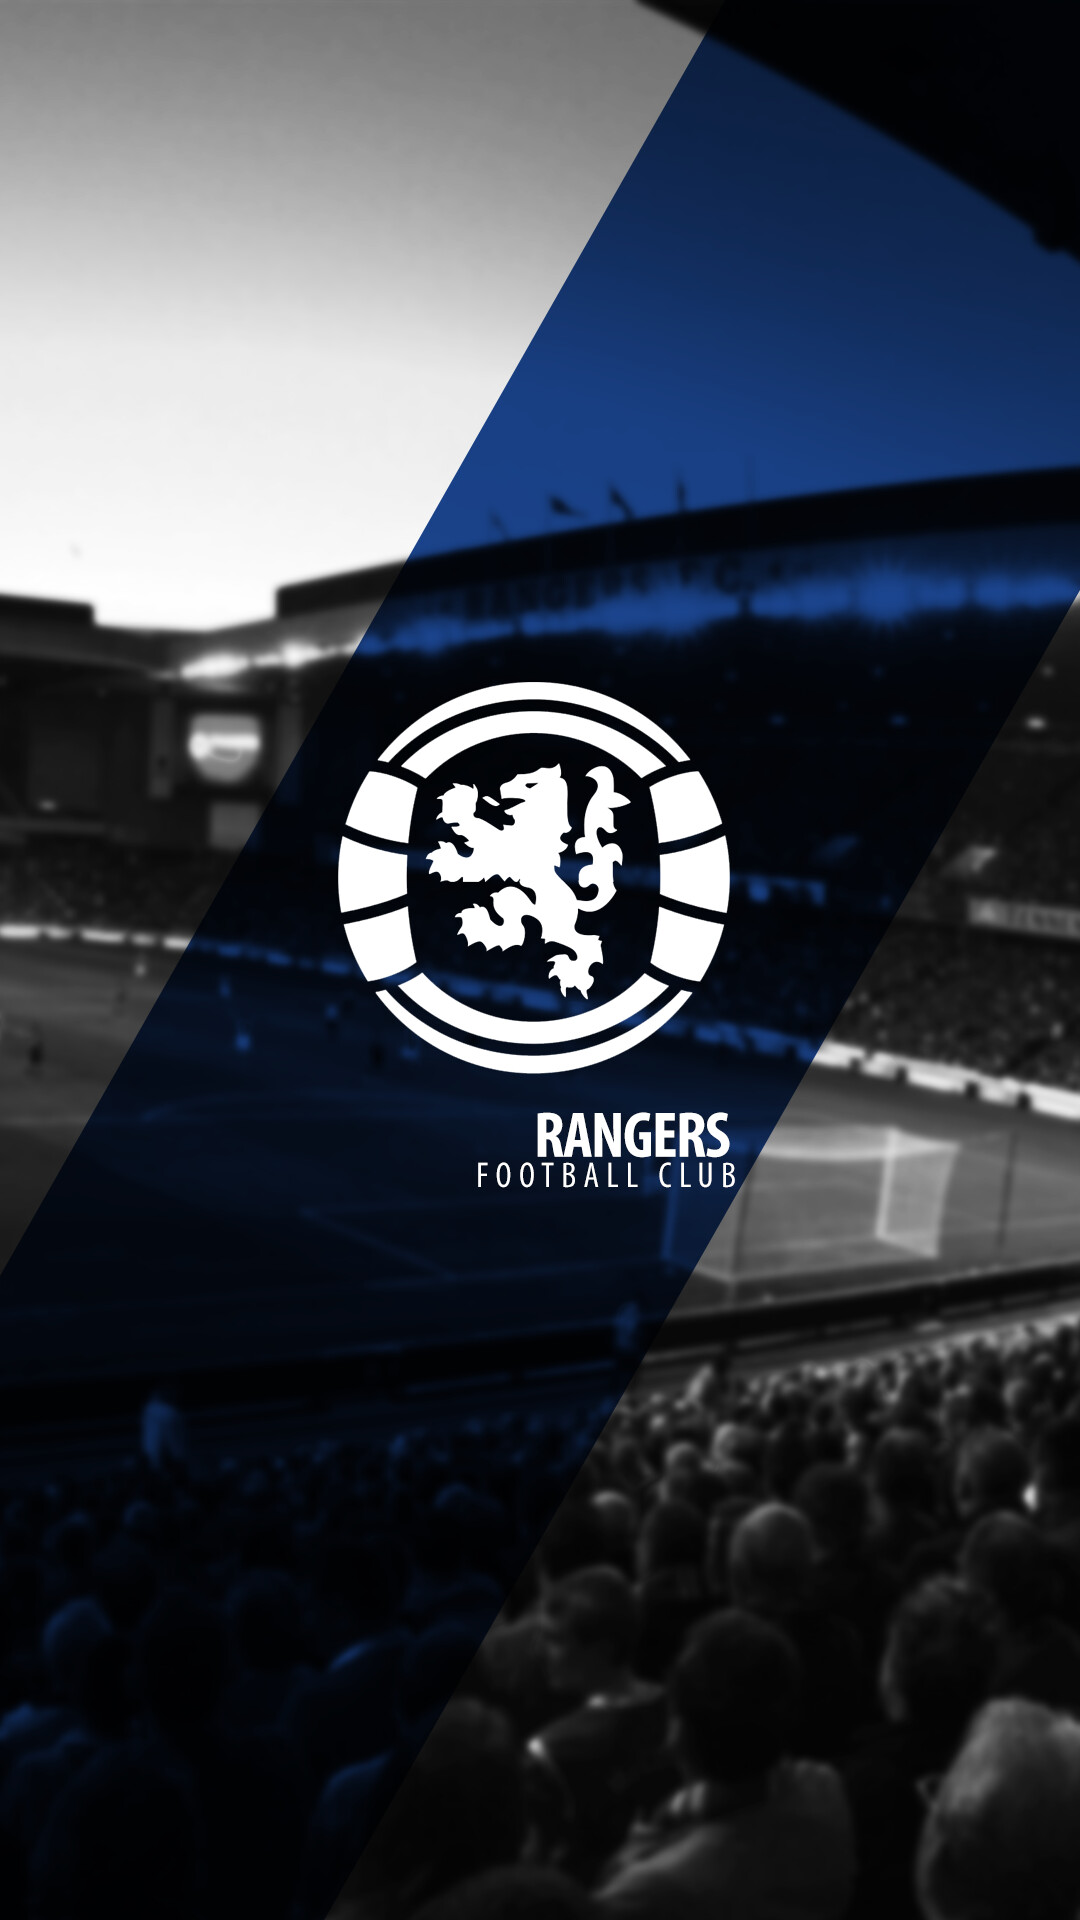 Rangers F.C.: A football club that was formed by brothers Moses McNeil and Peter McNeil. 1080x1920 Full HD Wallpaper.